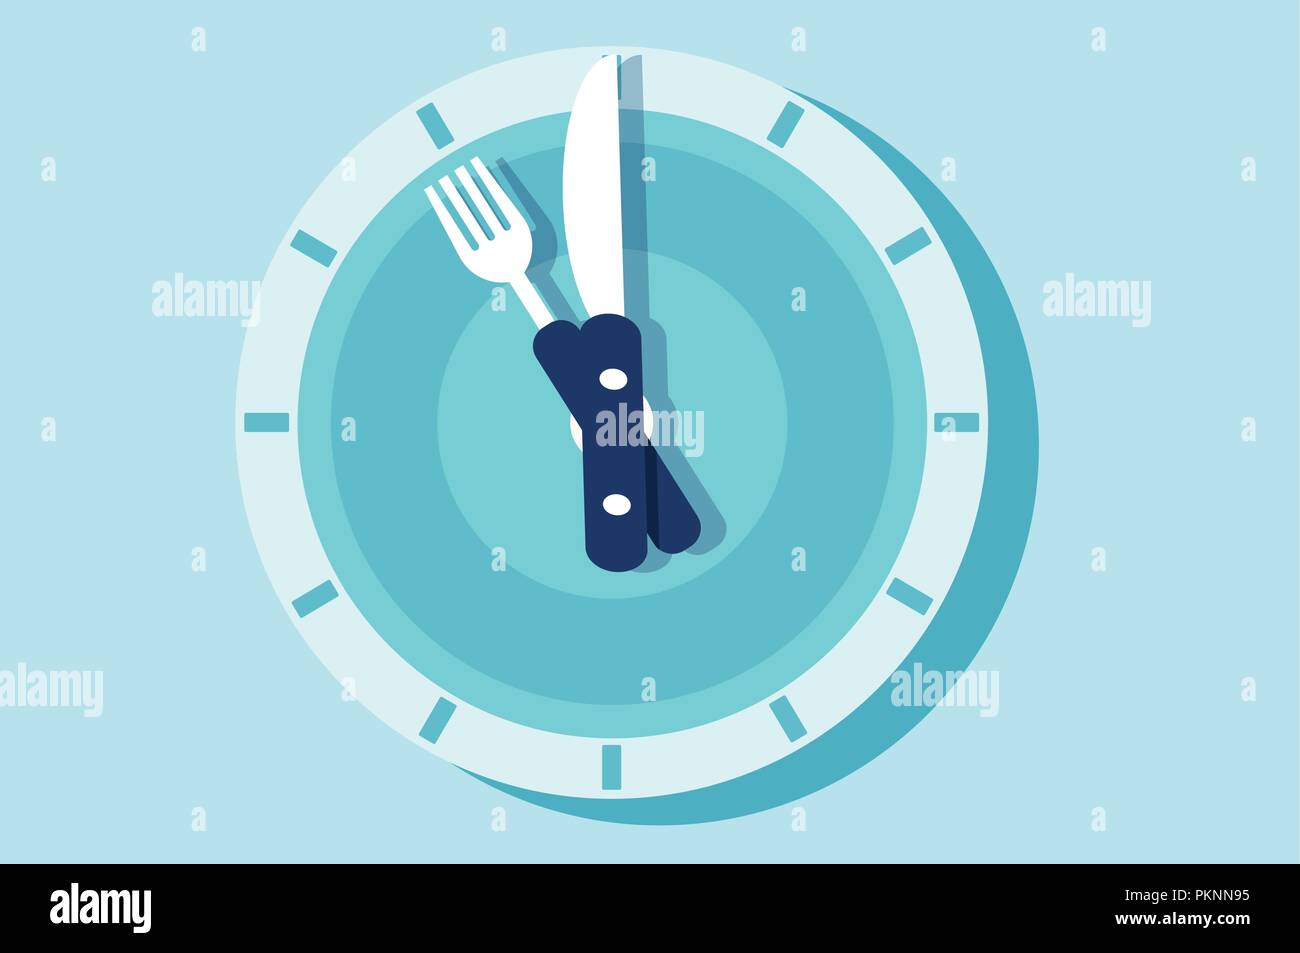 Vector of the clock face in the form of plate with knife and fork arms. Time for food, lunch, menu design concept Stock Vector